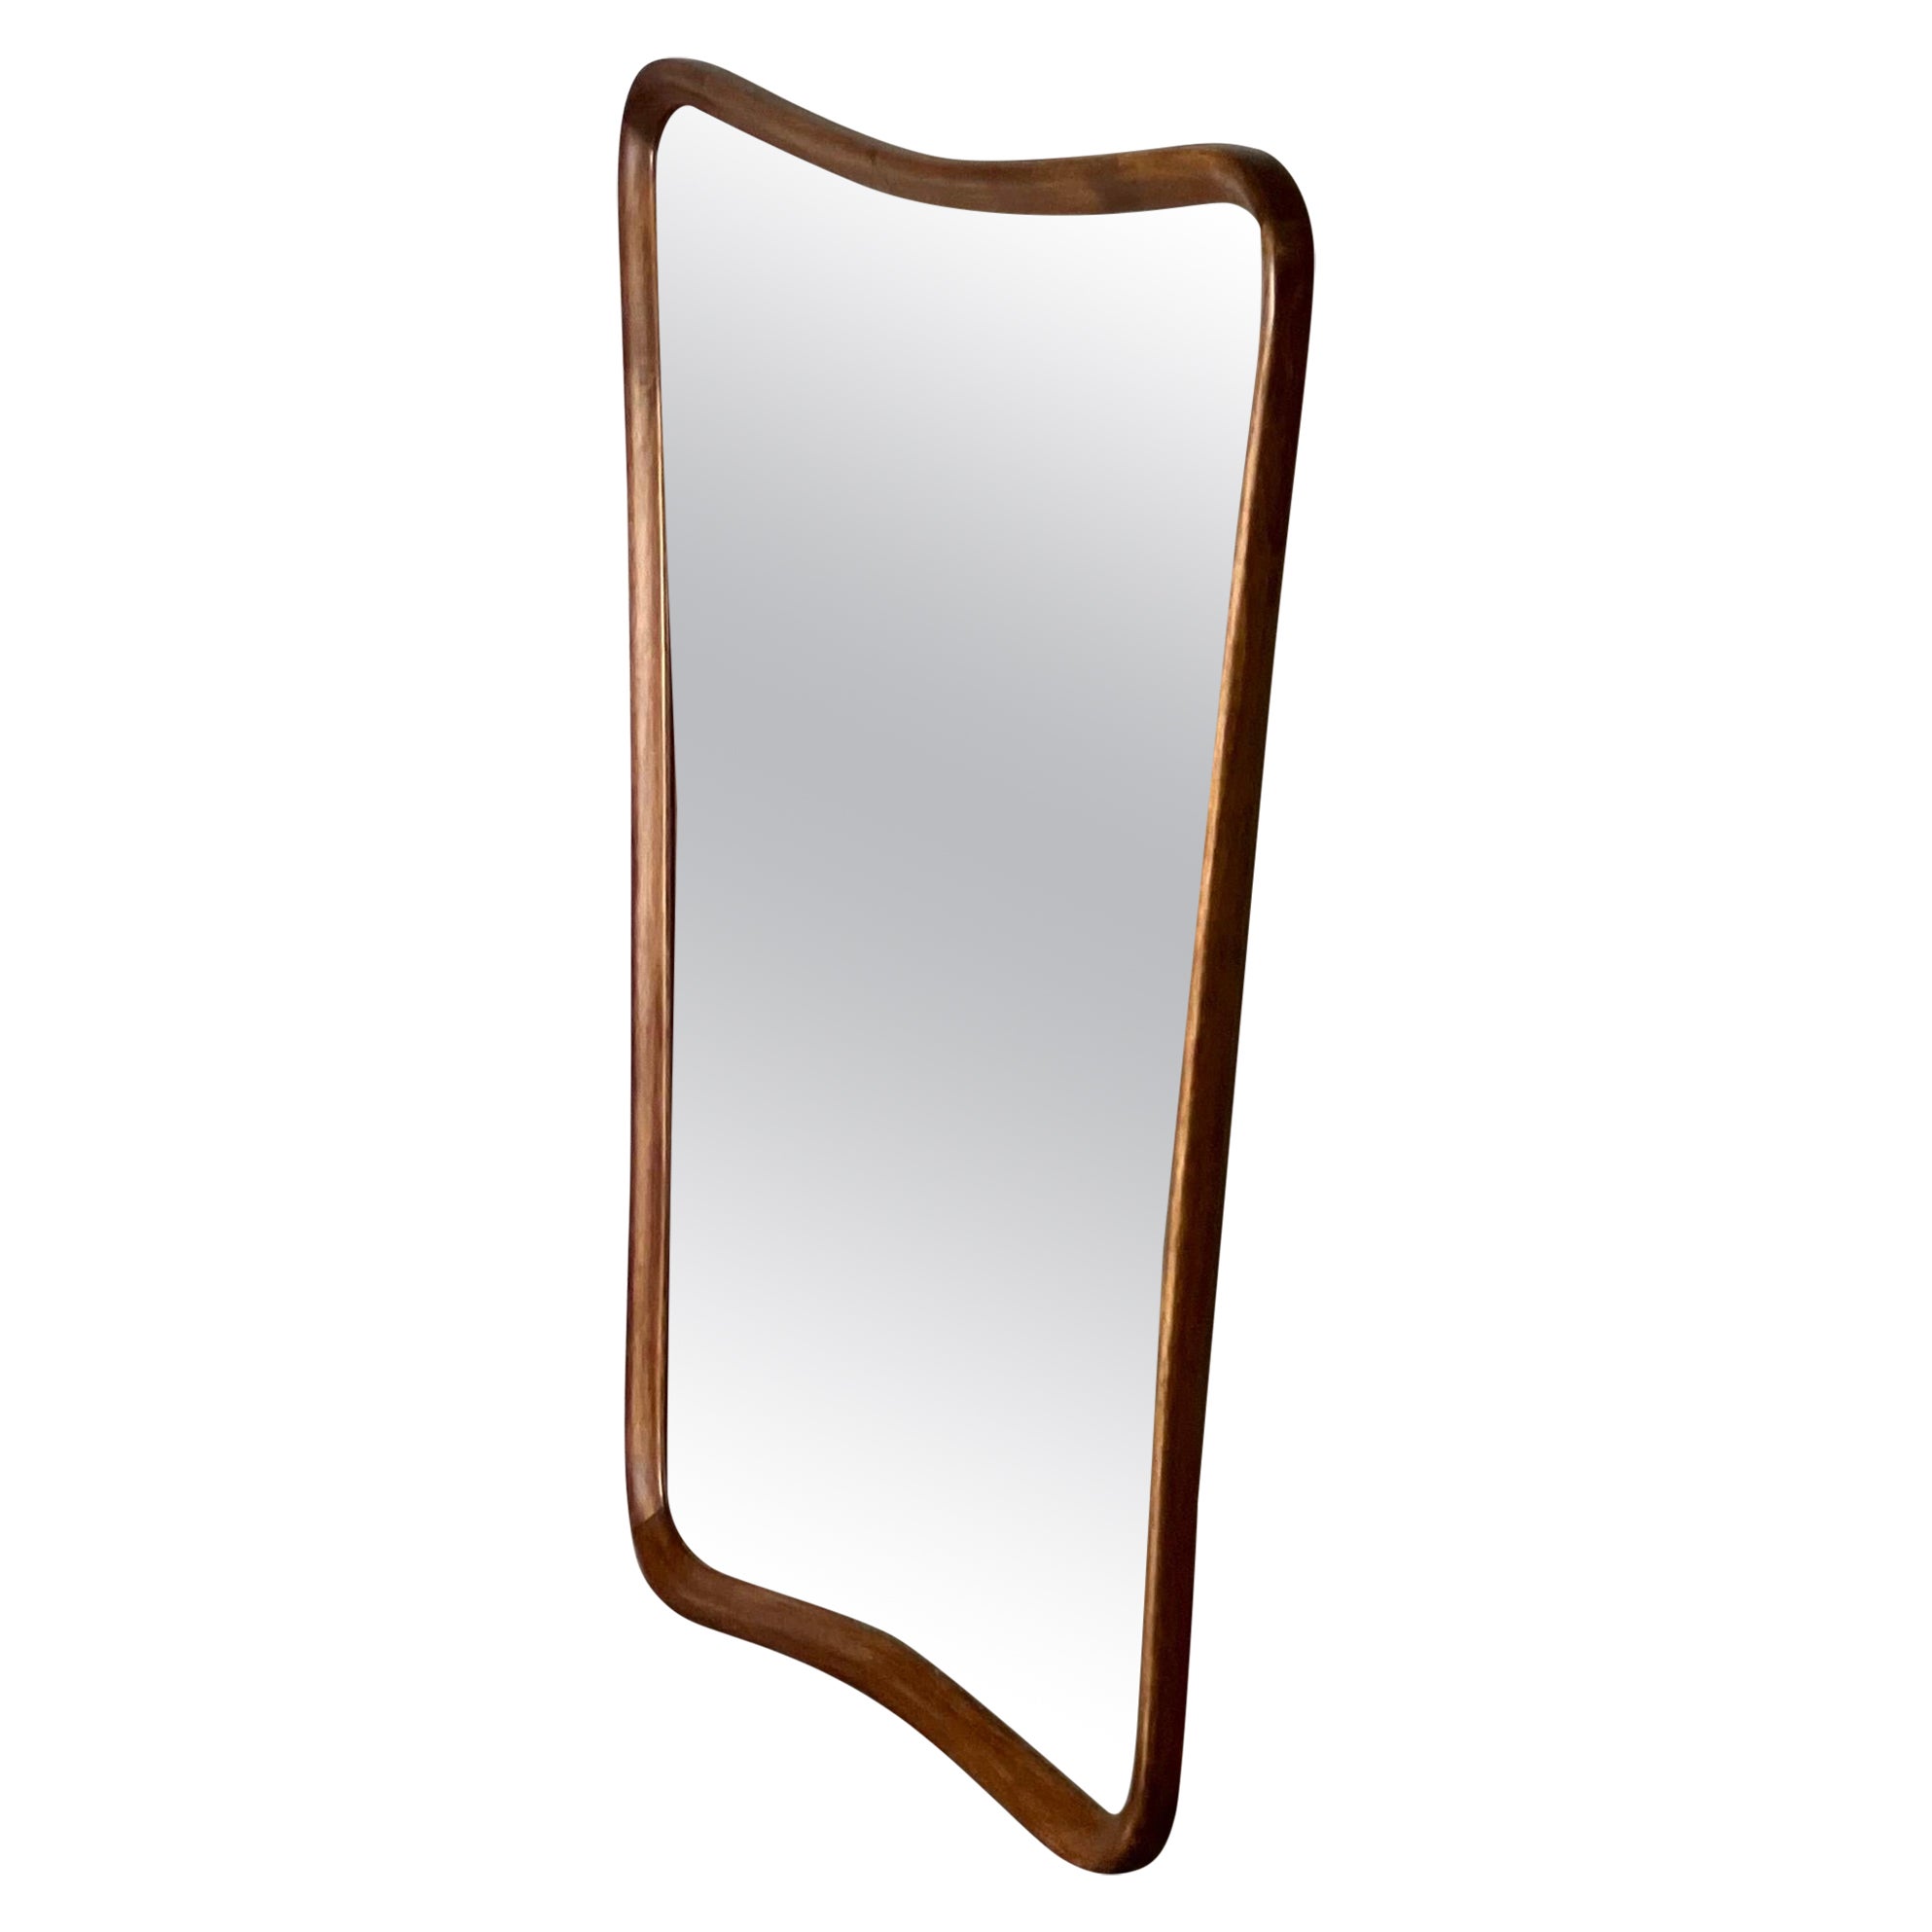 1950s wooden frame mirror For Sale